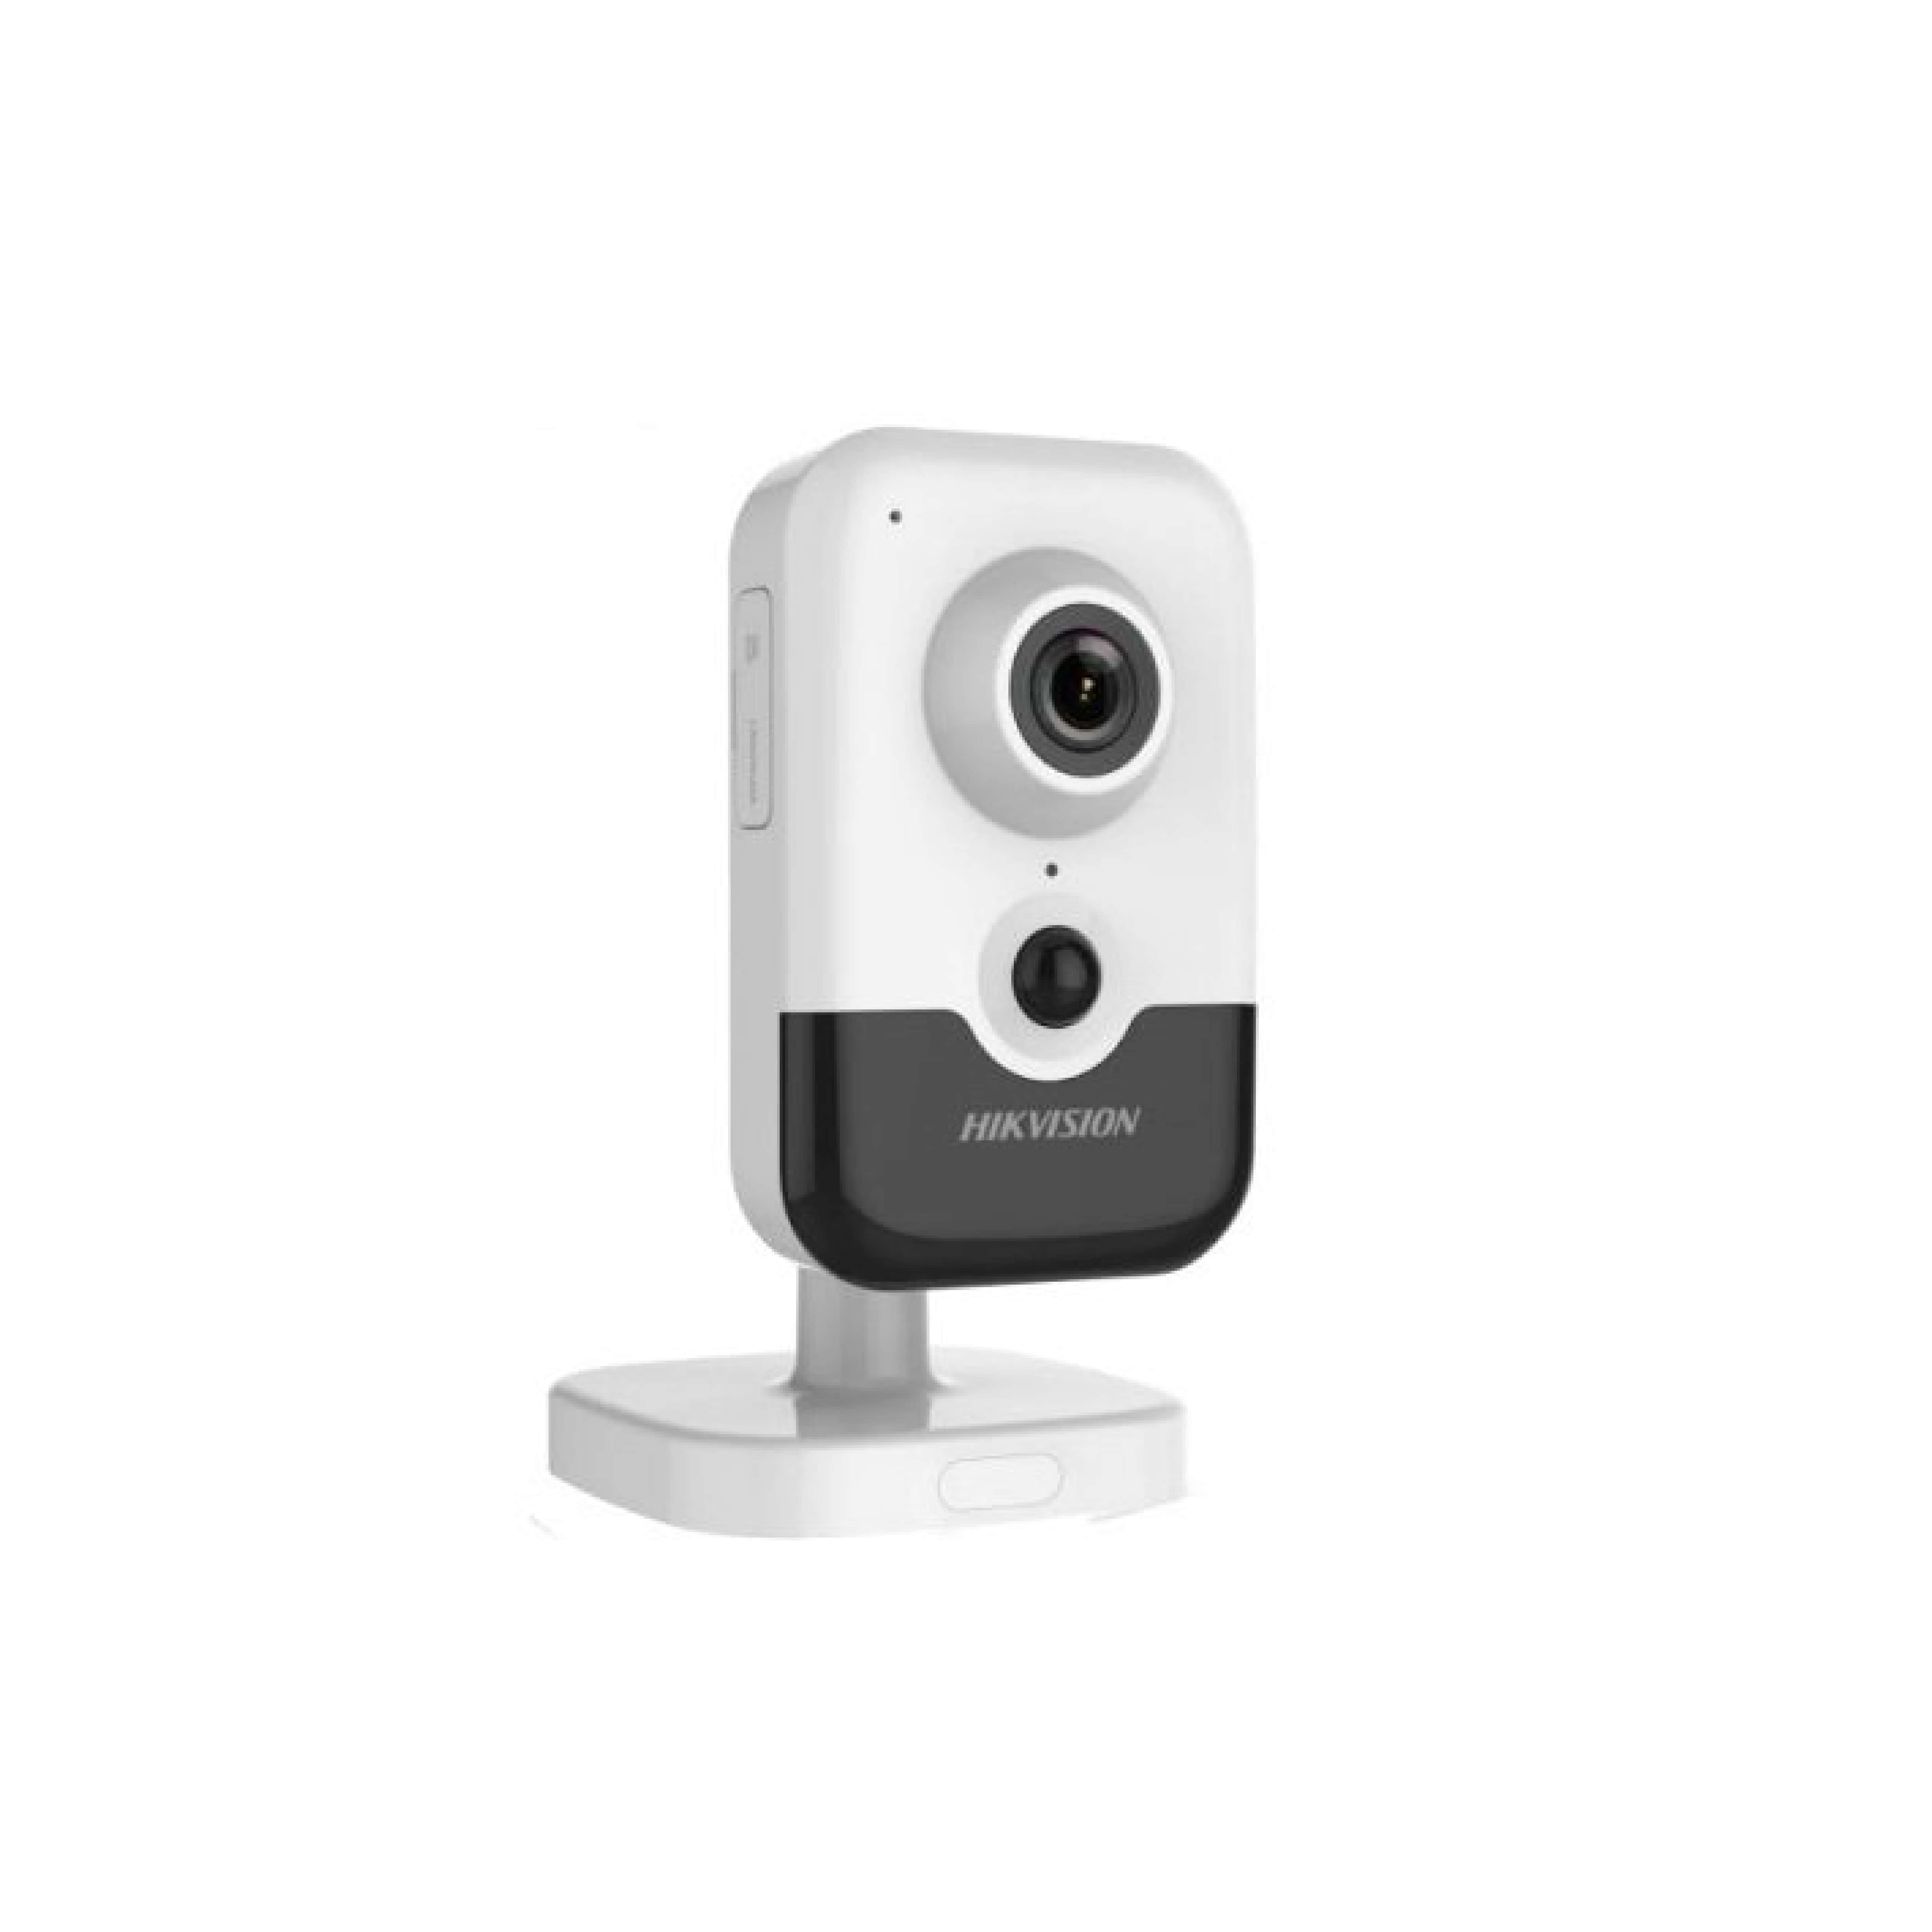 Mắt Camera IP/Wifi Hikvision DS-2CD2443G0-IW 4.0 Mpx lắp trong nhà